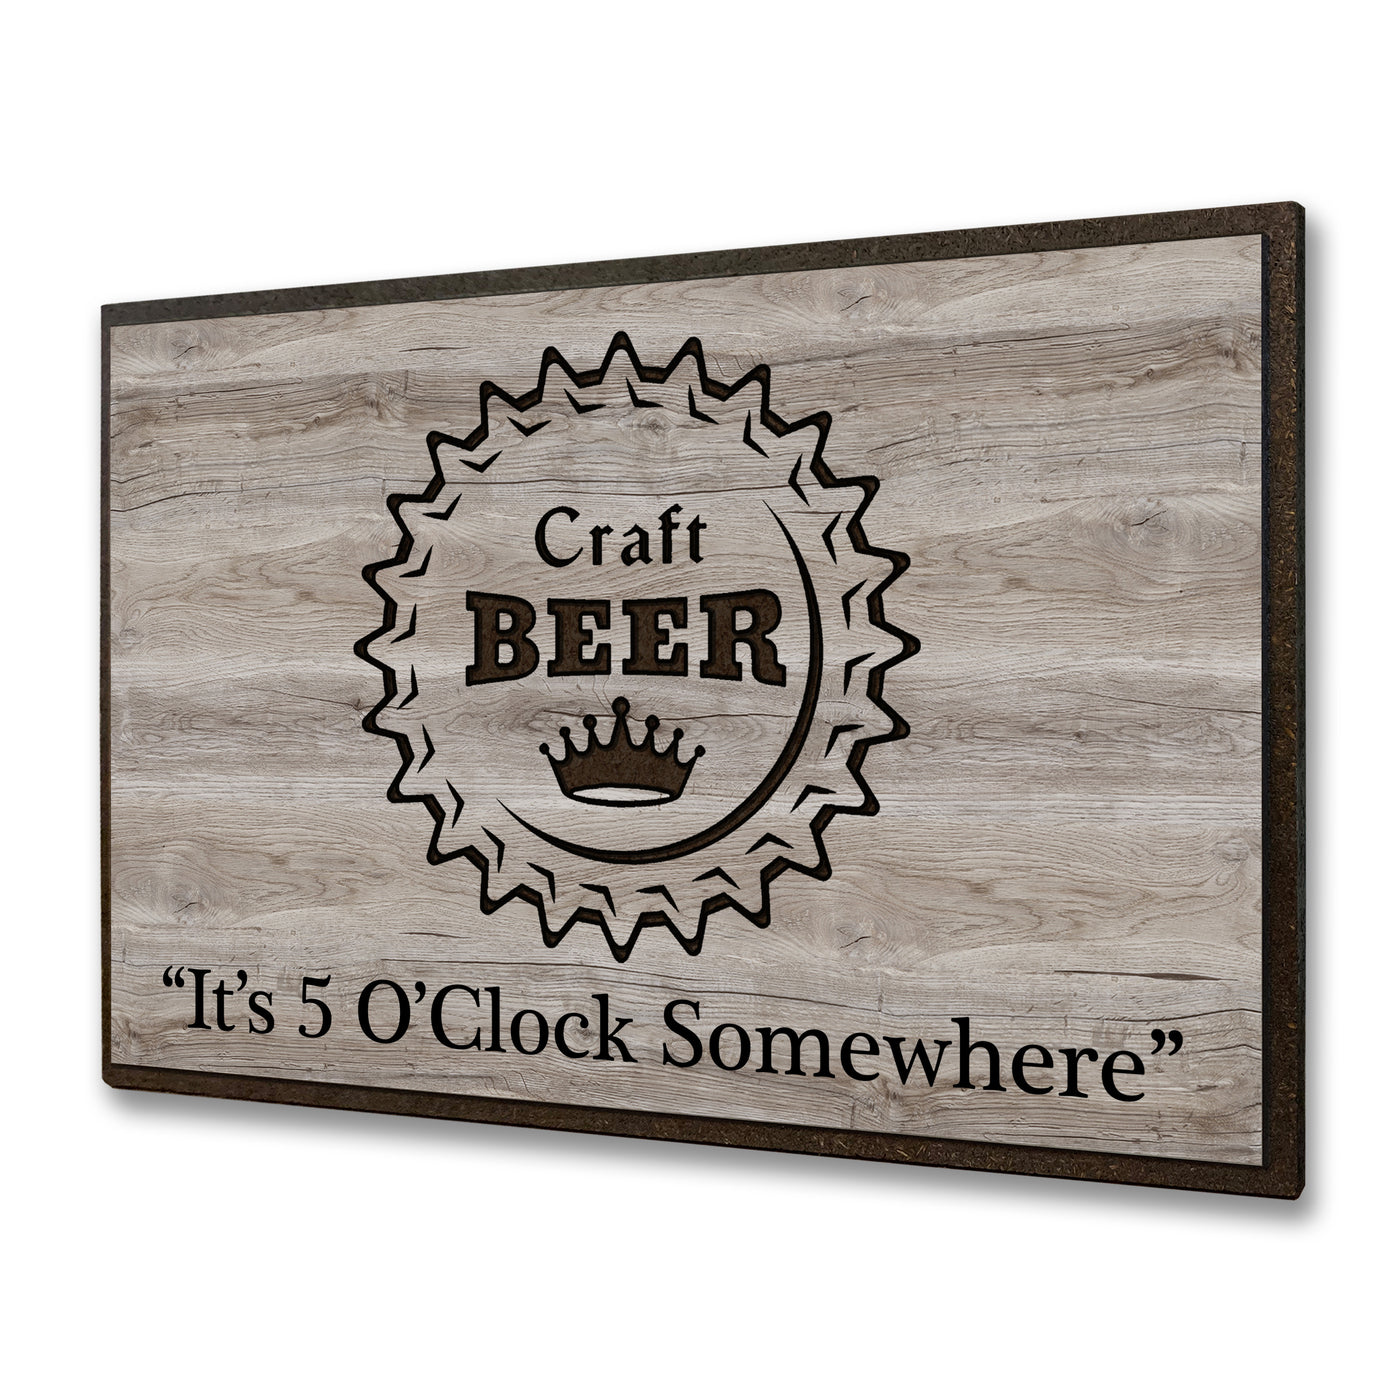 Funny humorous quote sign - Craft Beer It's 5 o'clock somewhere sign - Vintage mancave and sports bar wood sign